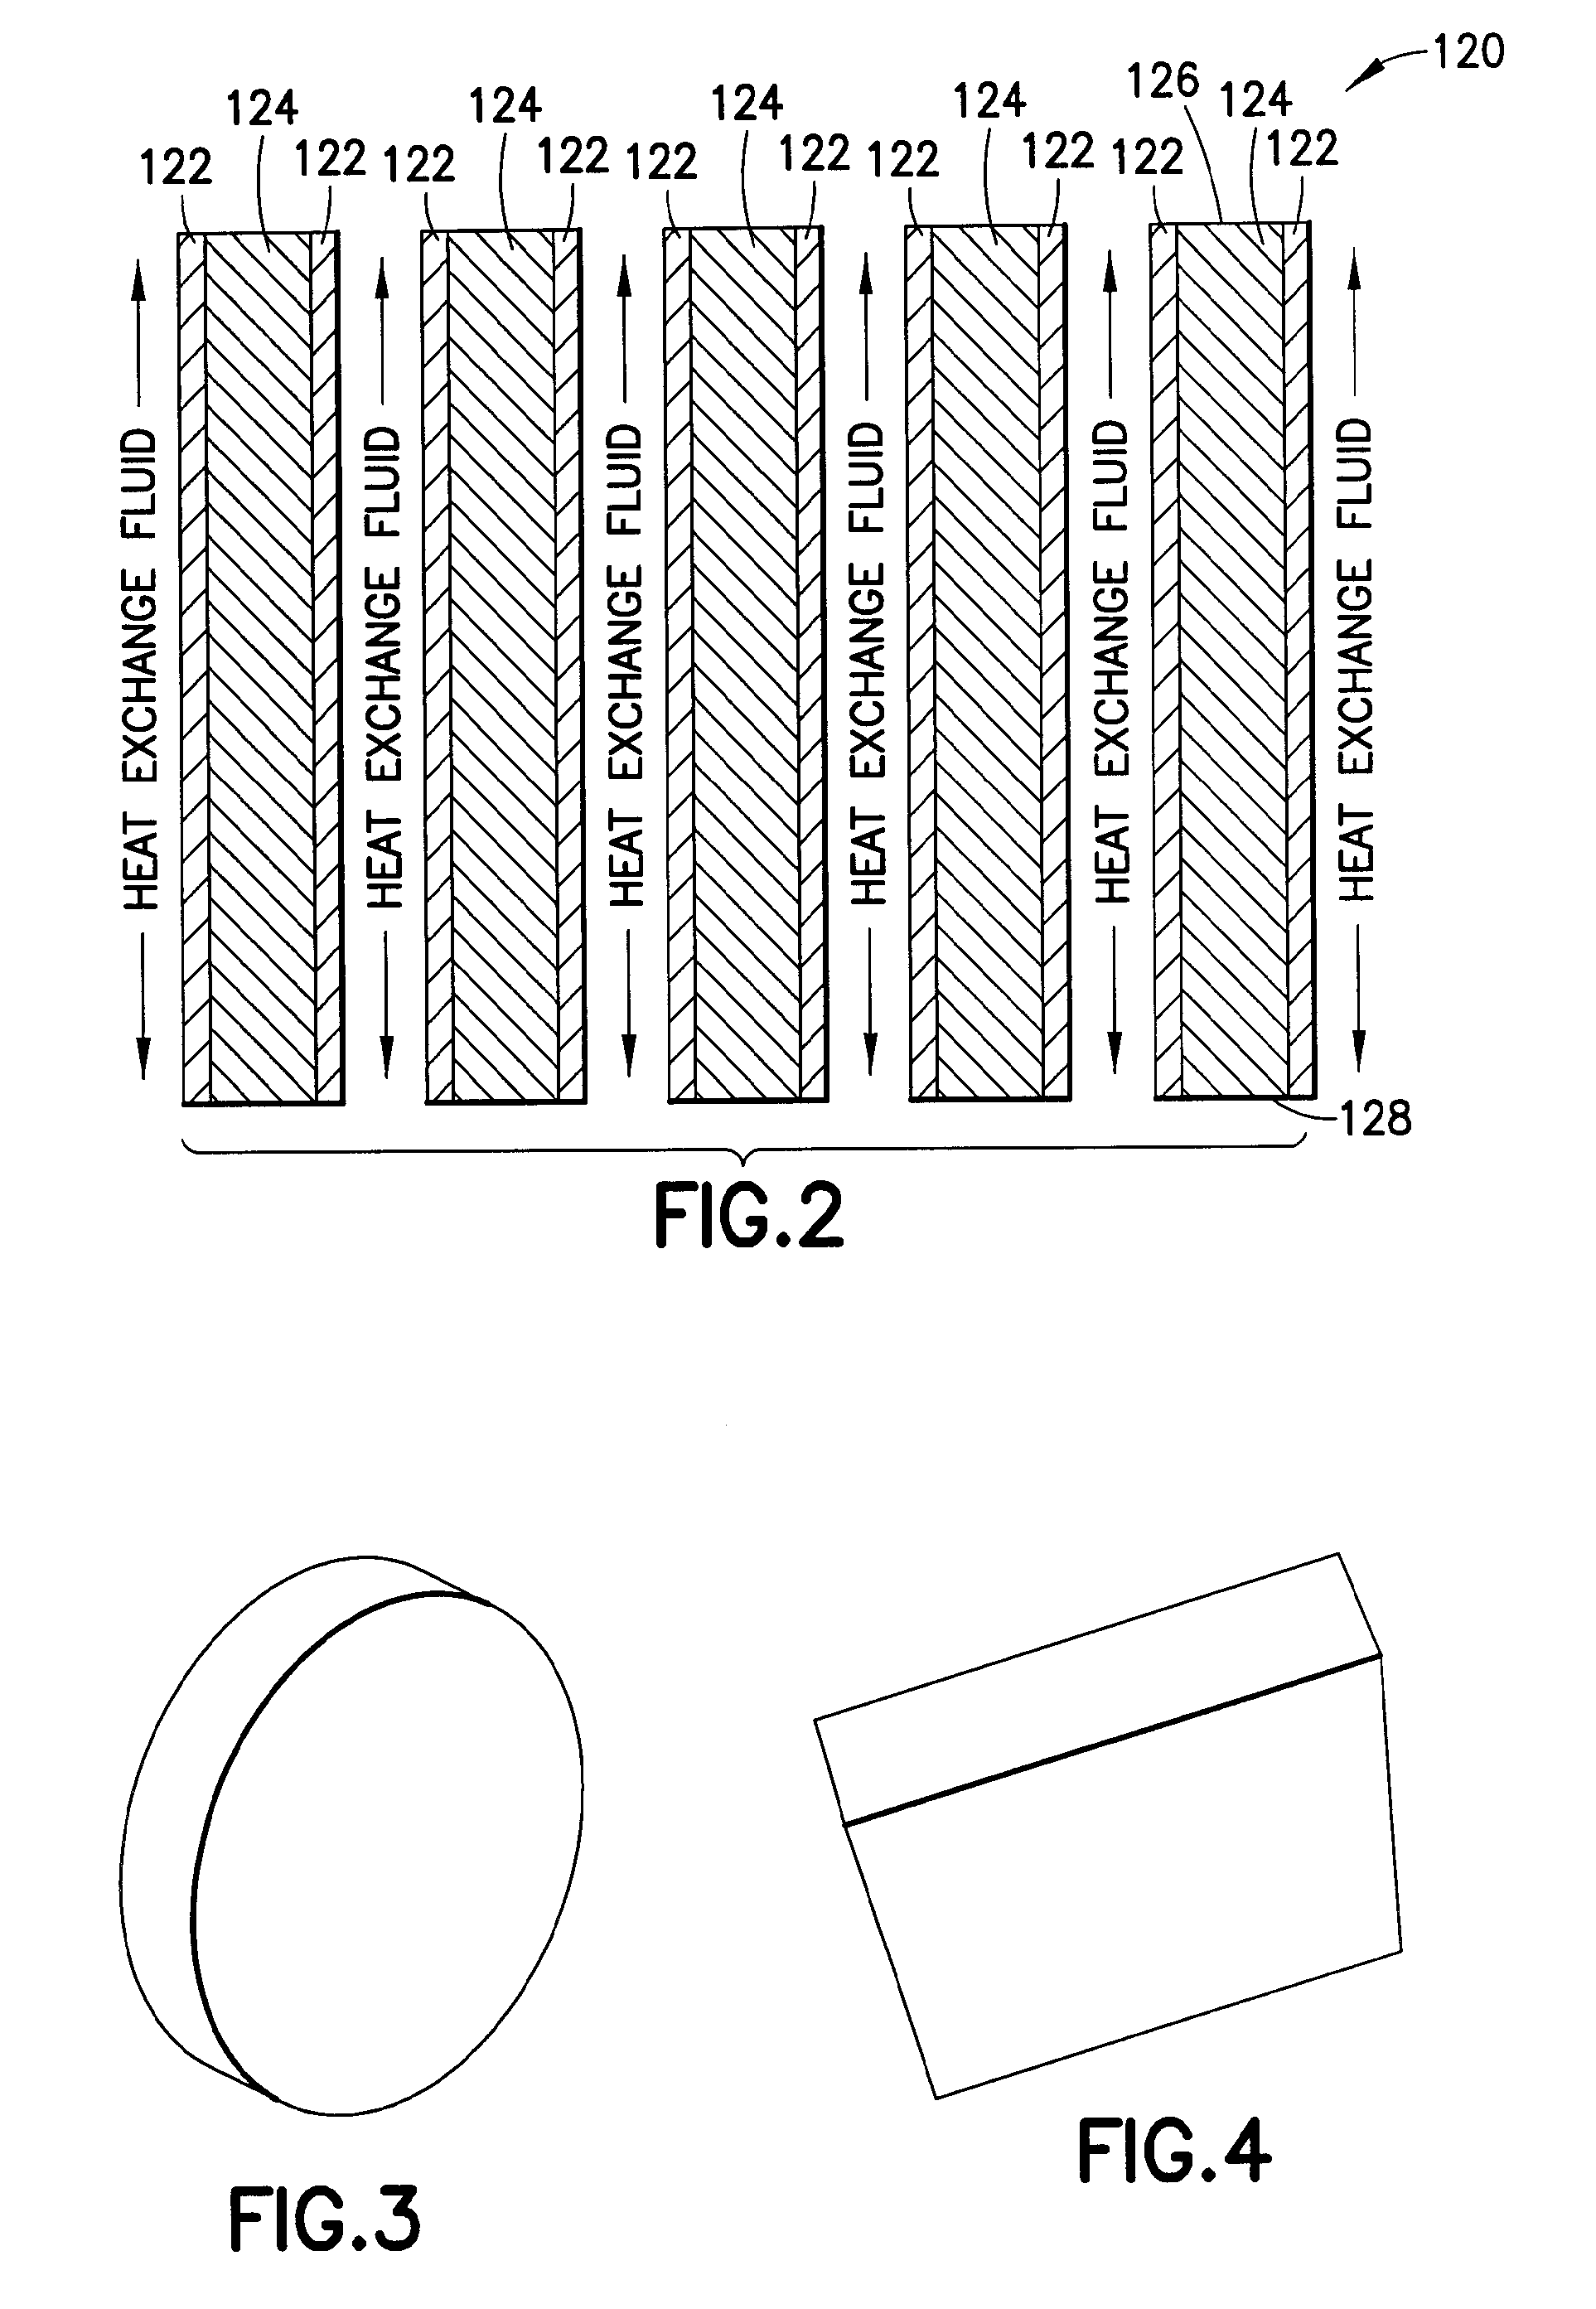 Component for solar adsorption refrigeration system and method of making such component